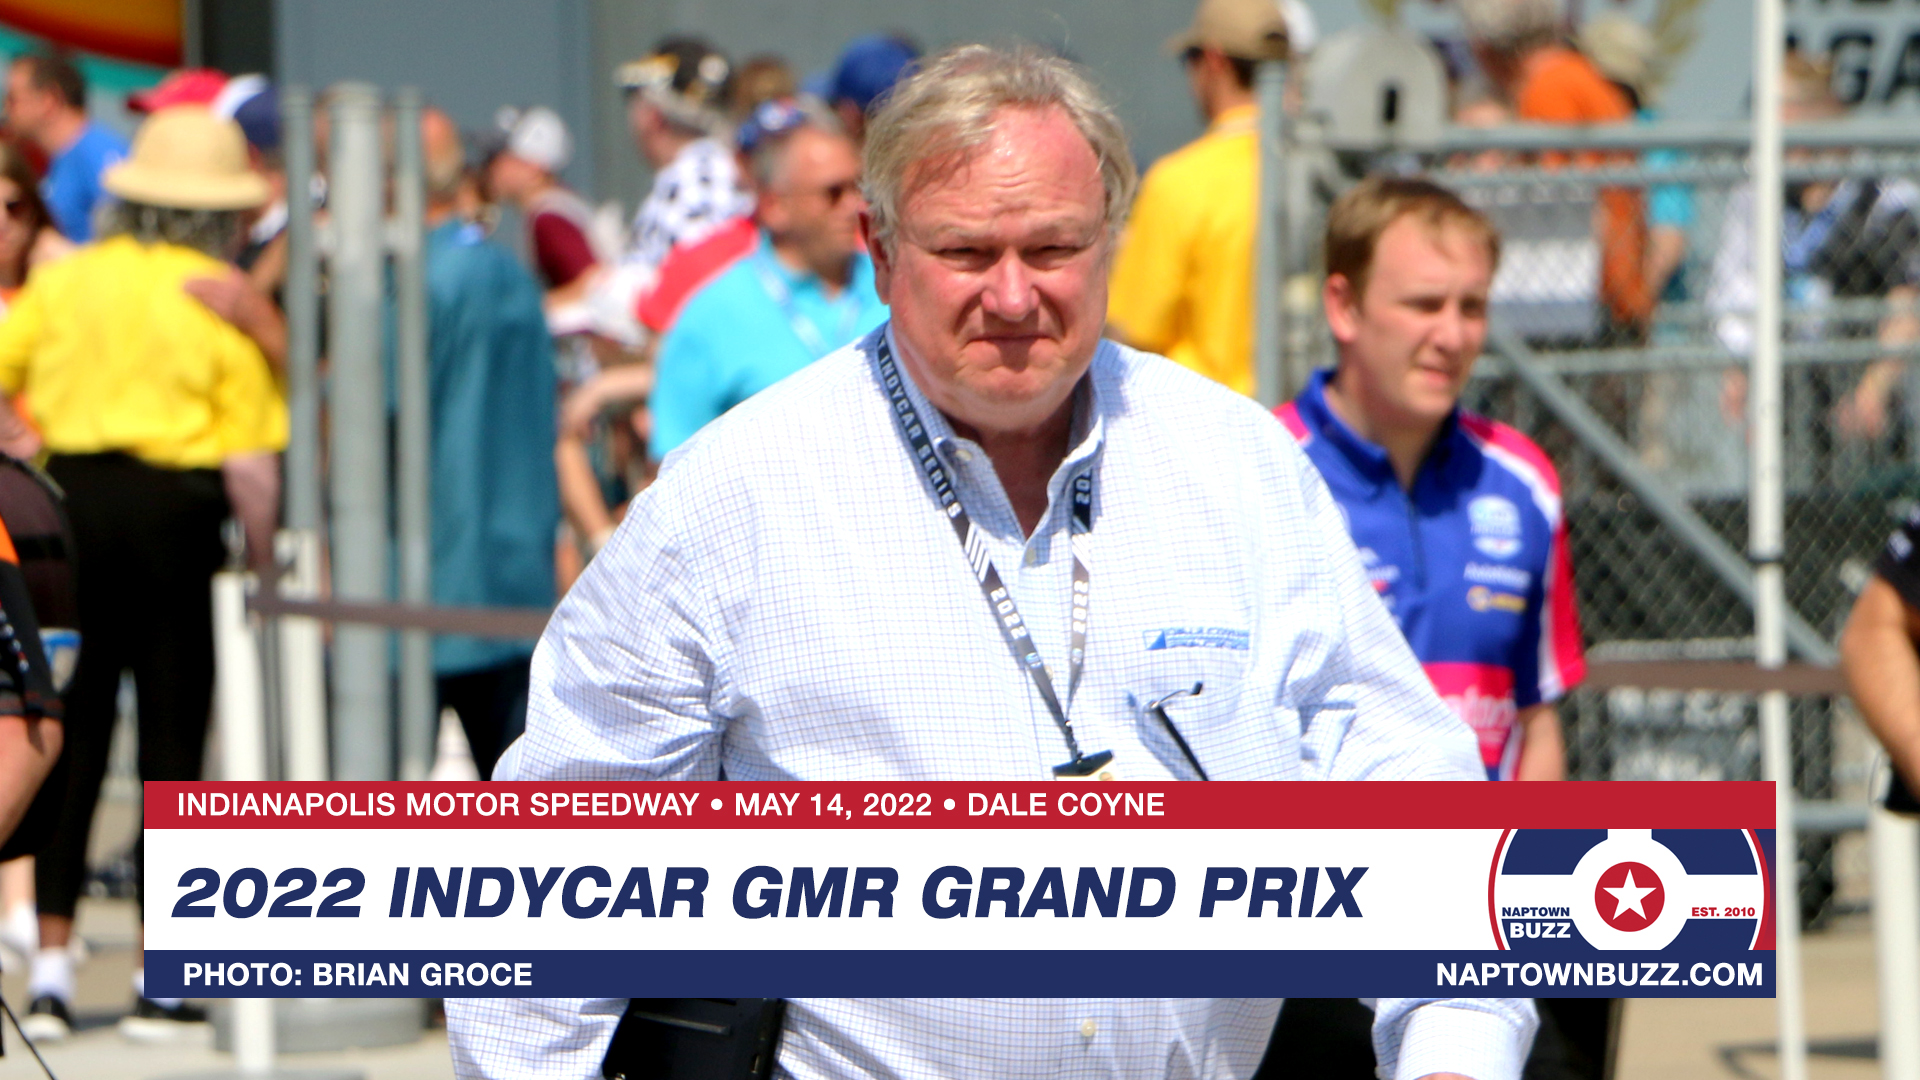 Dale Coyne on Indy Car Grand Prix Race Day, May 14, 2022